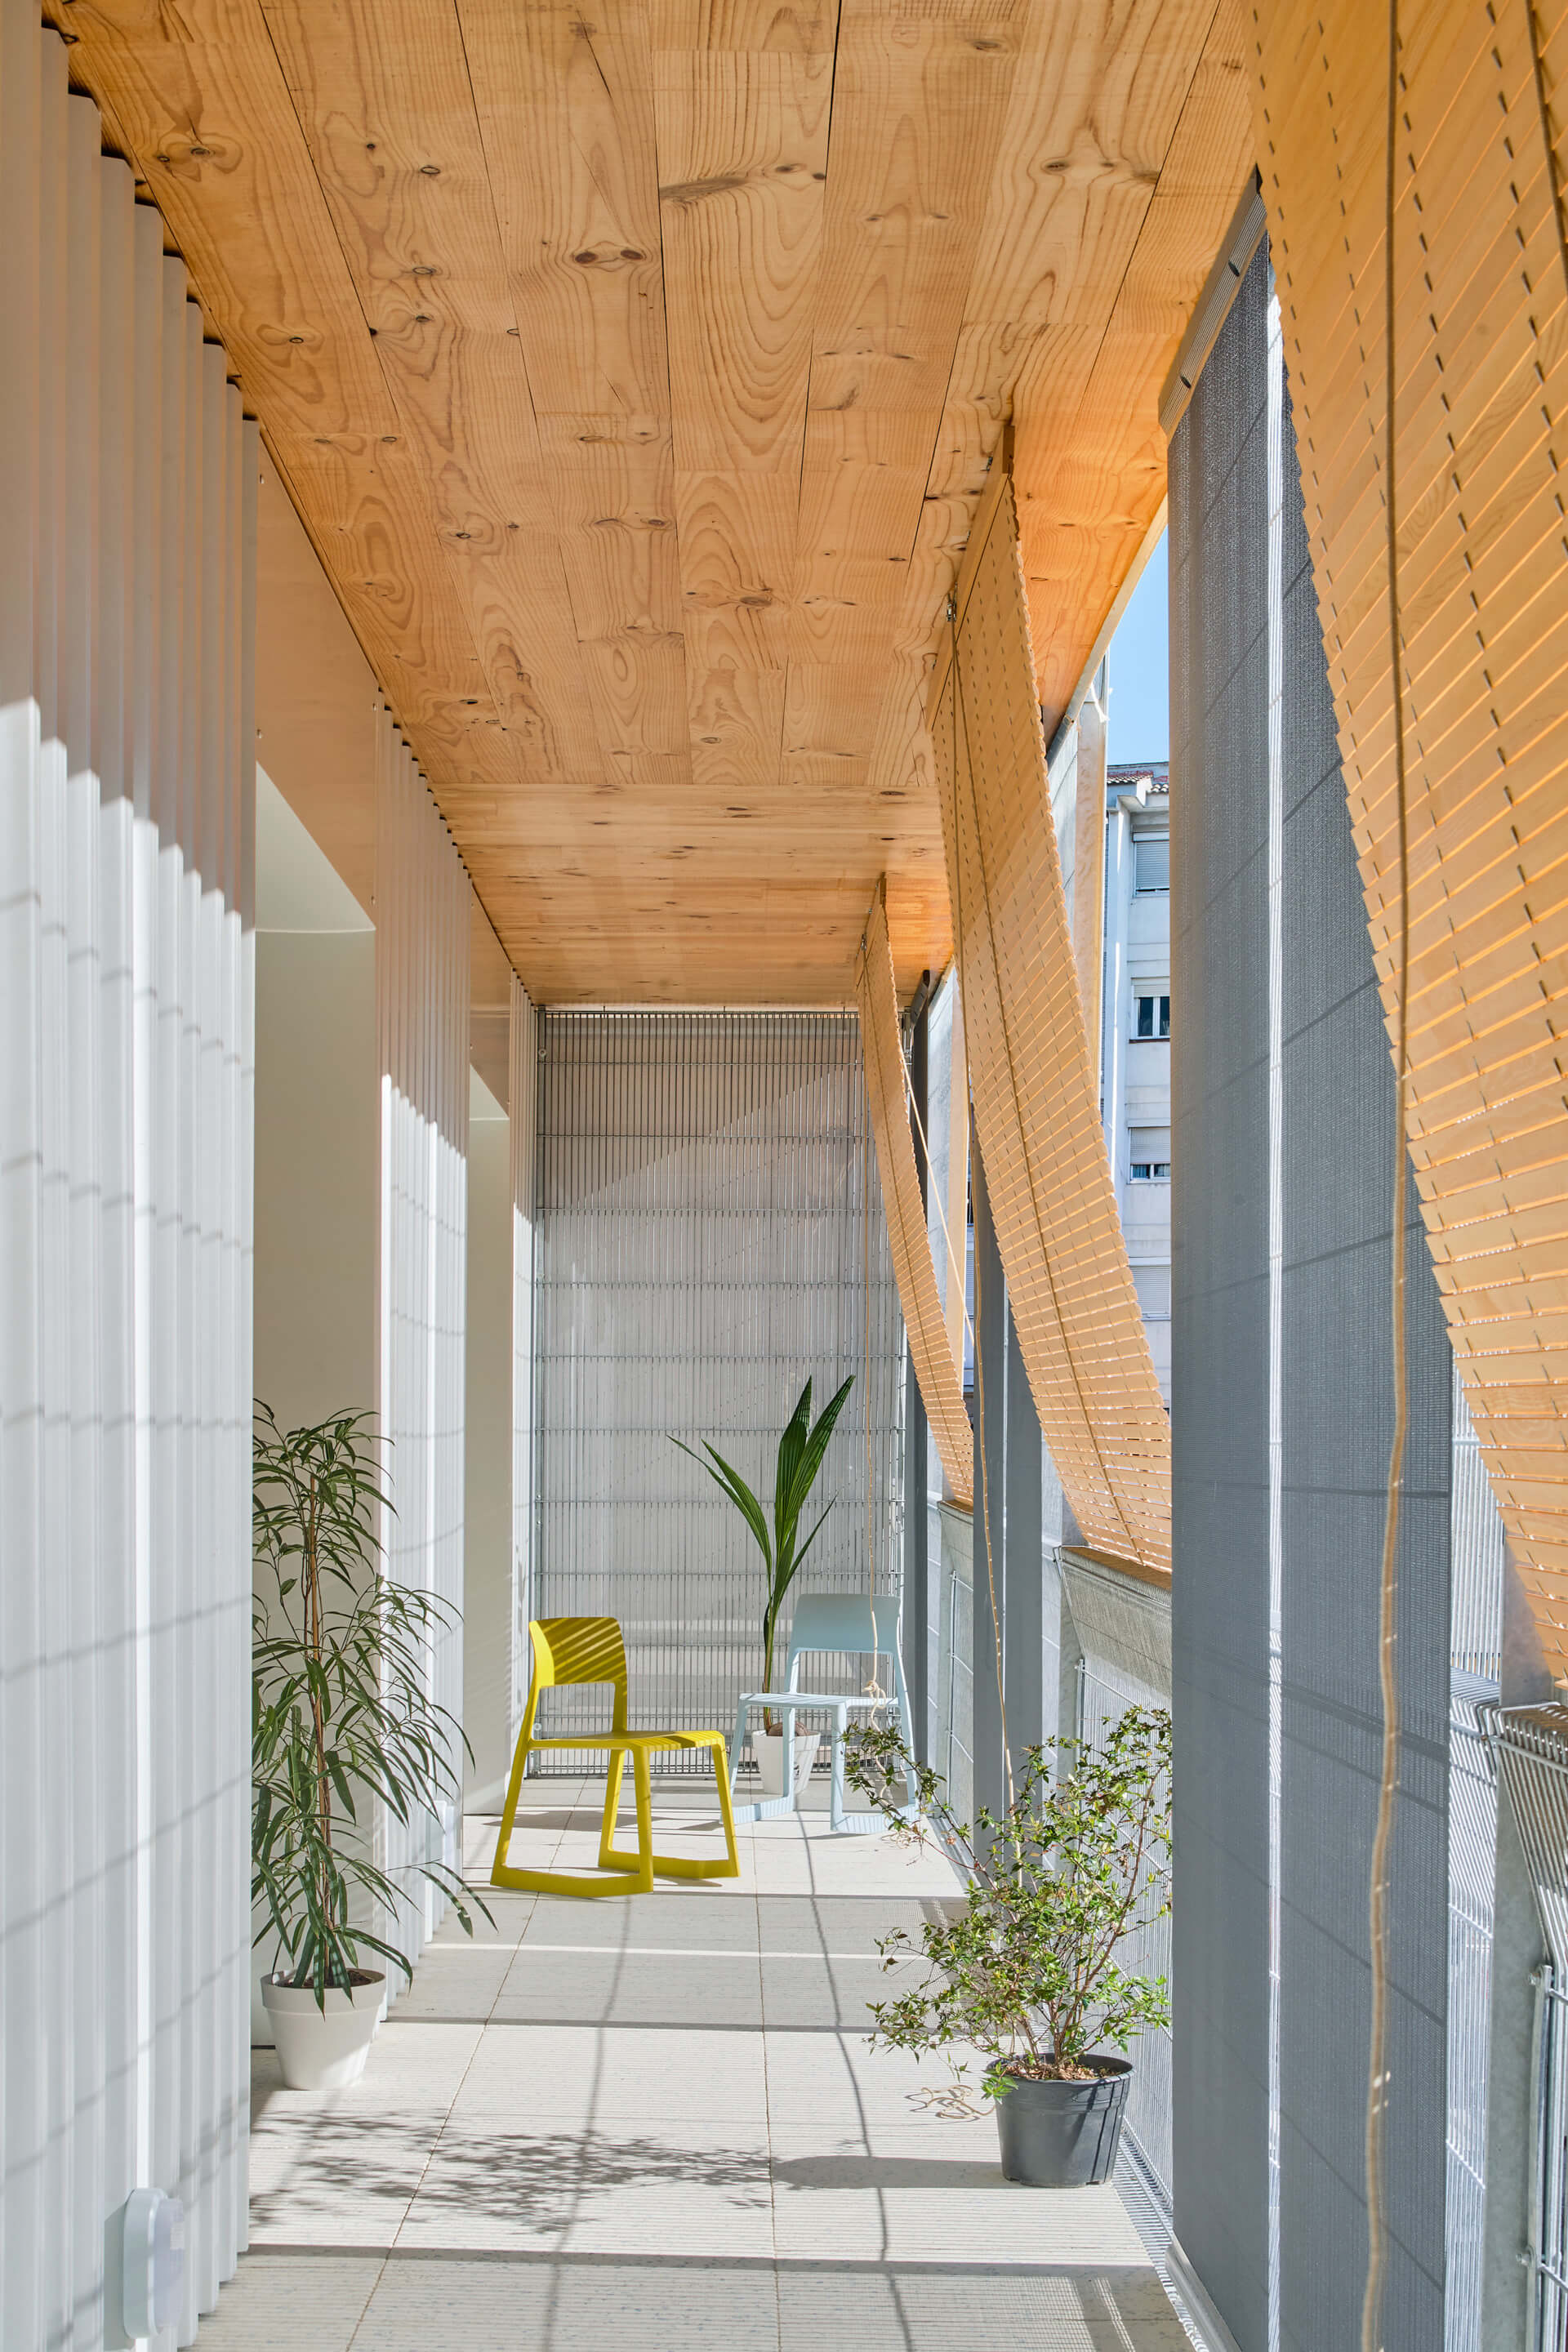 Exposed wooden ceilings on a terrace